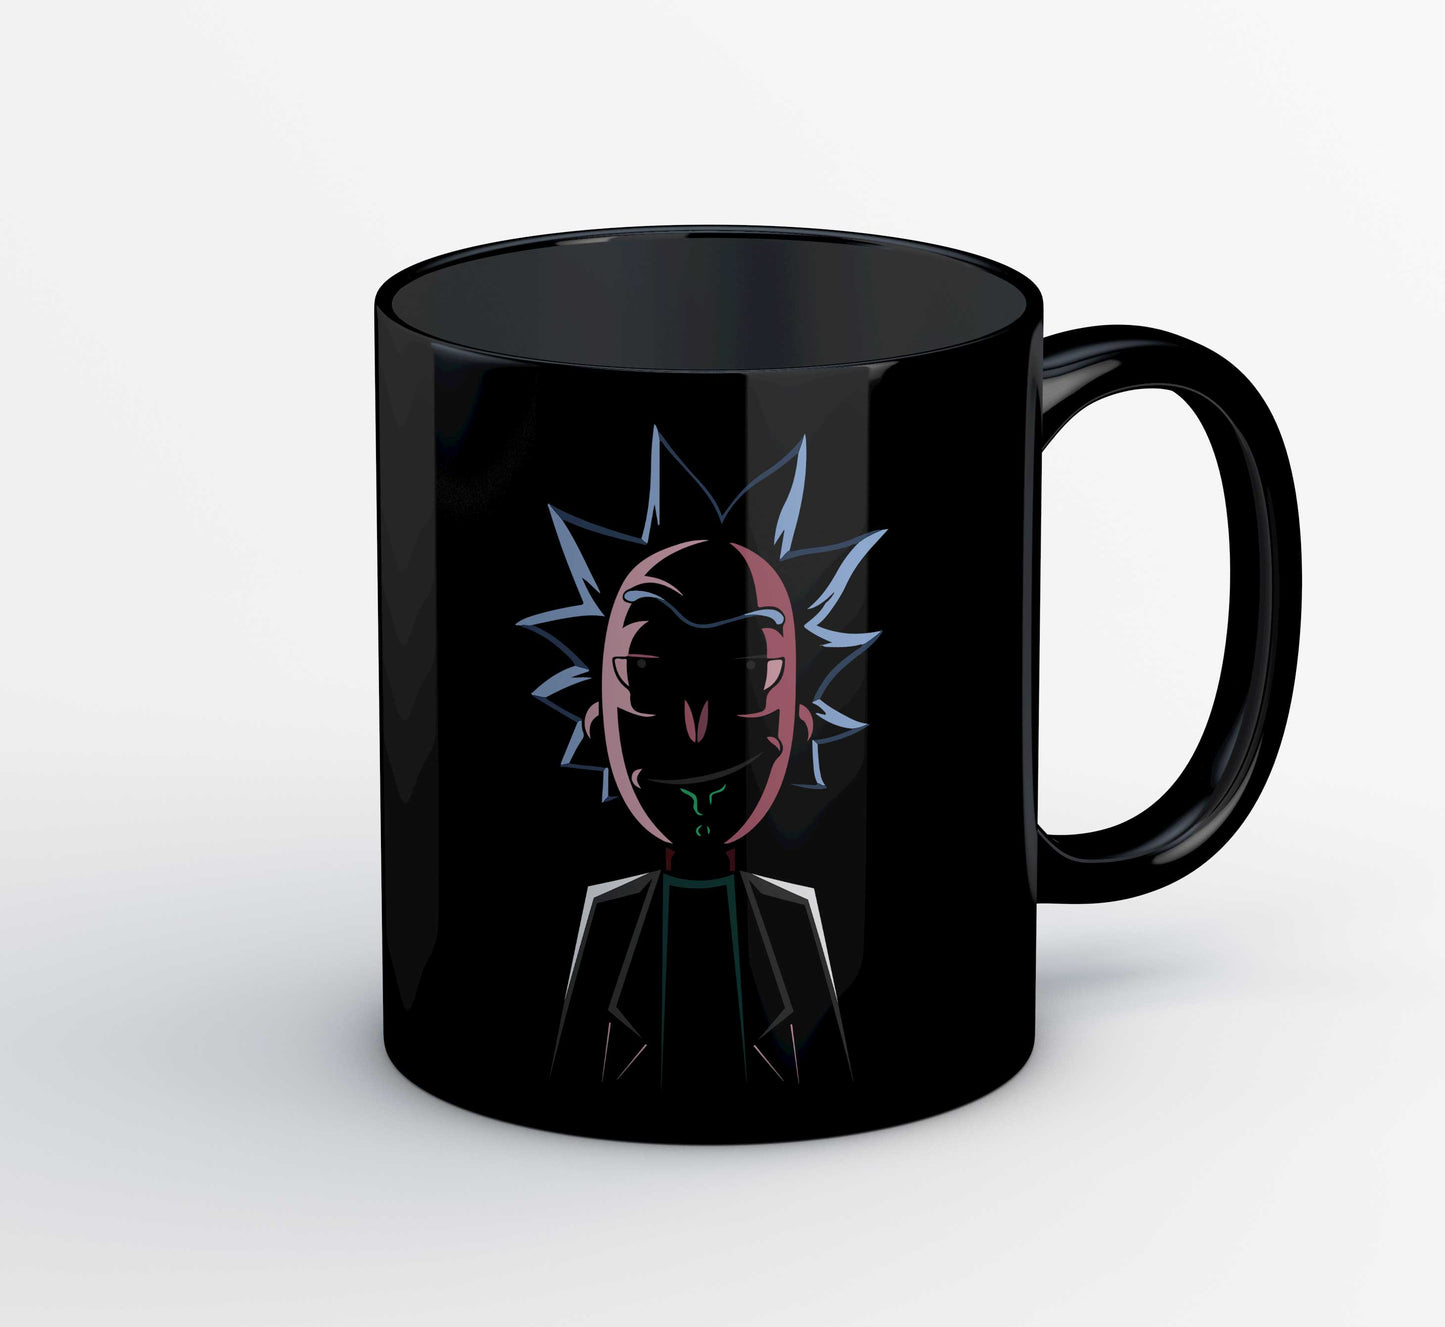 rick and morty the grandpa mug coffee ceramic buy online india the banyan tee tbt men women girls boys unisex  rick and morty online summer beth mr meeseeks jerry quote vector art clothing accessories merchandise